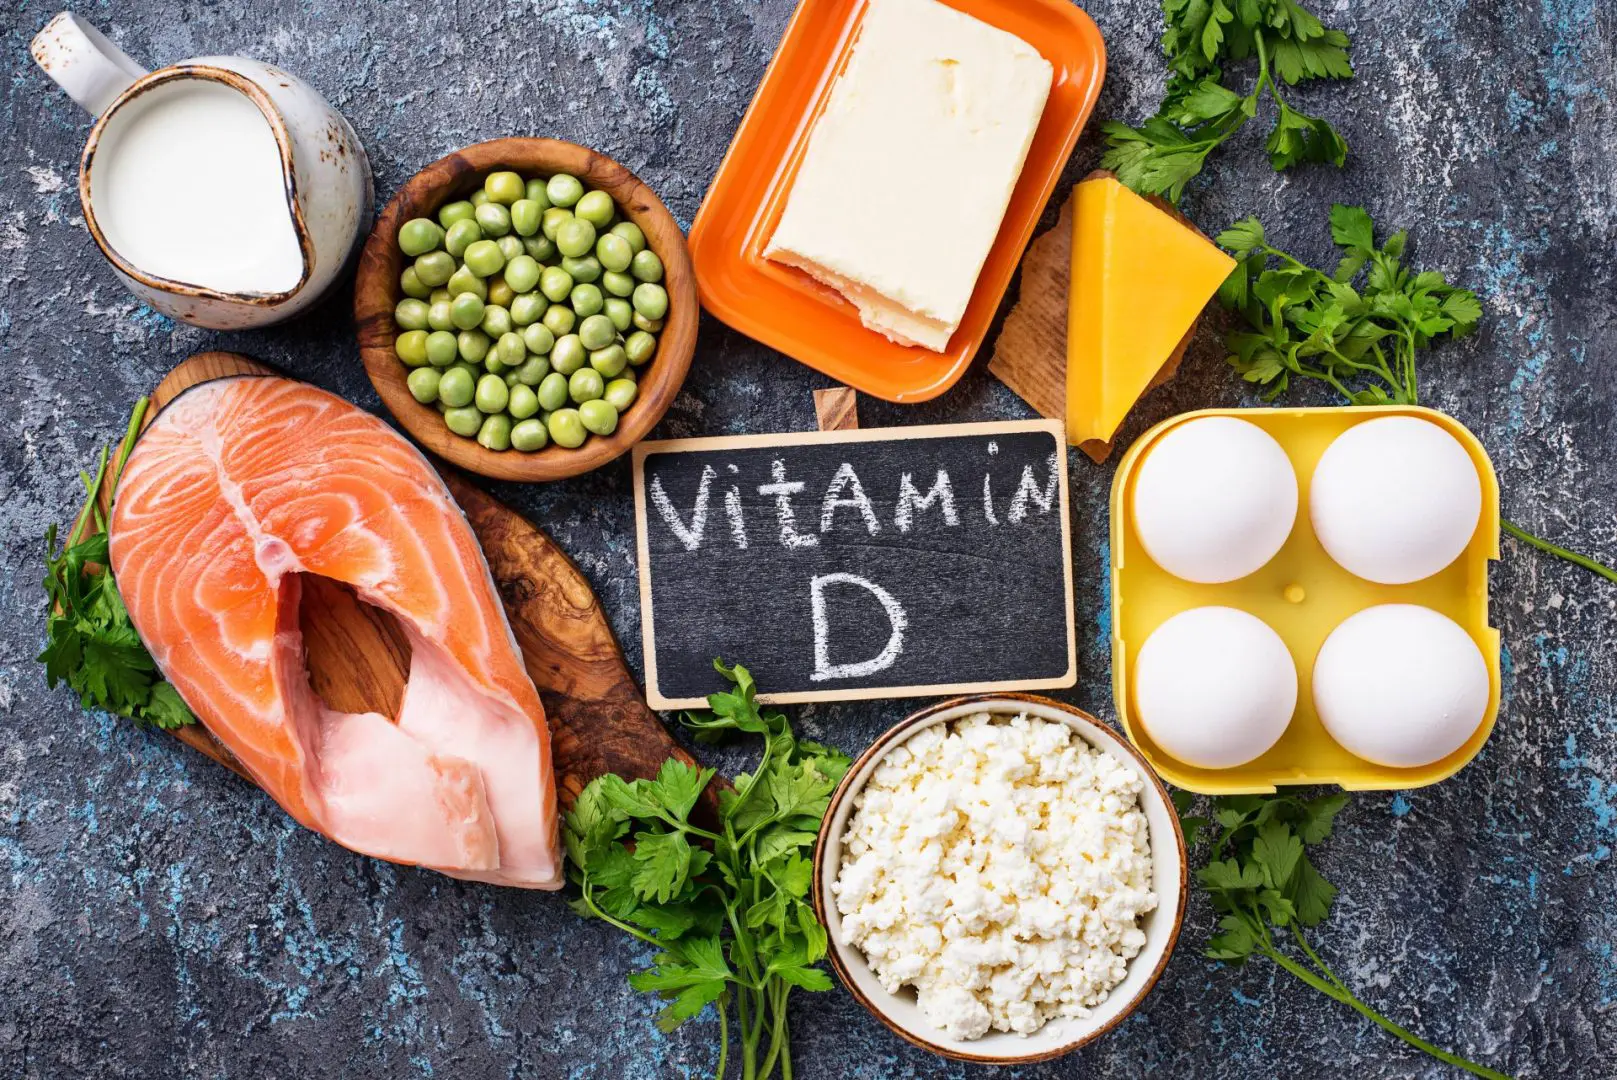 Why do we need Vitamin D?